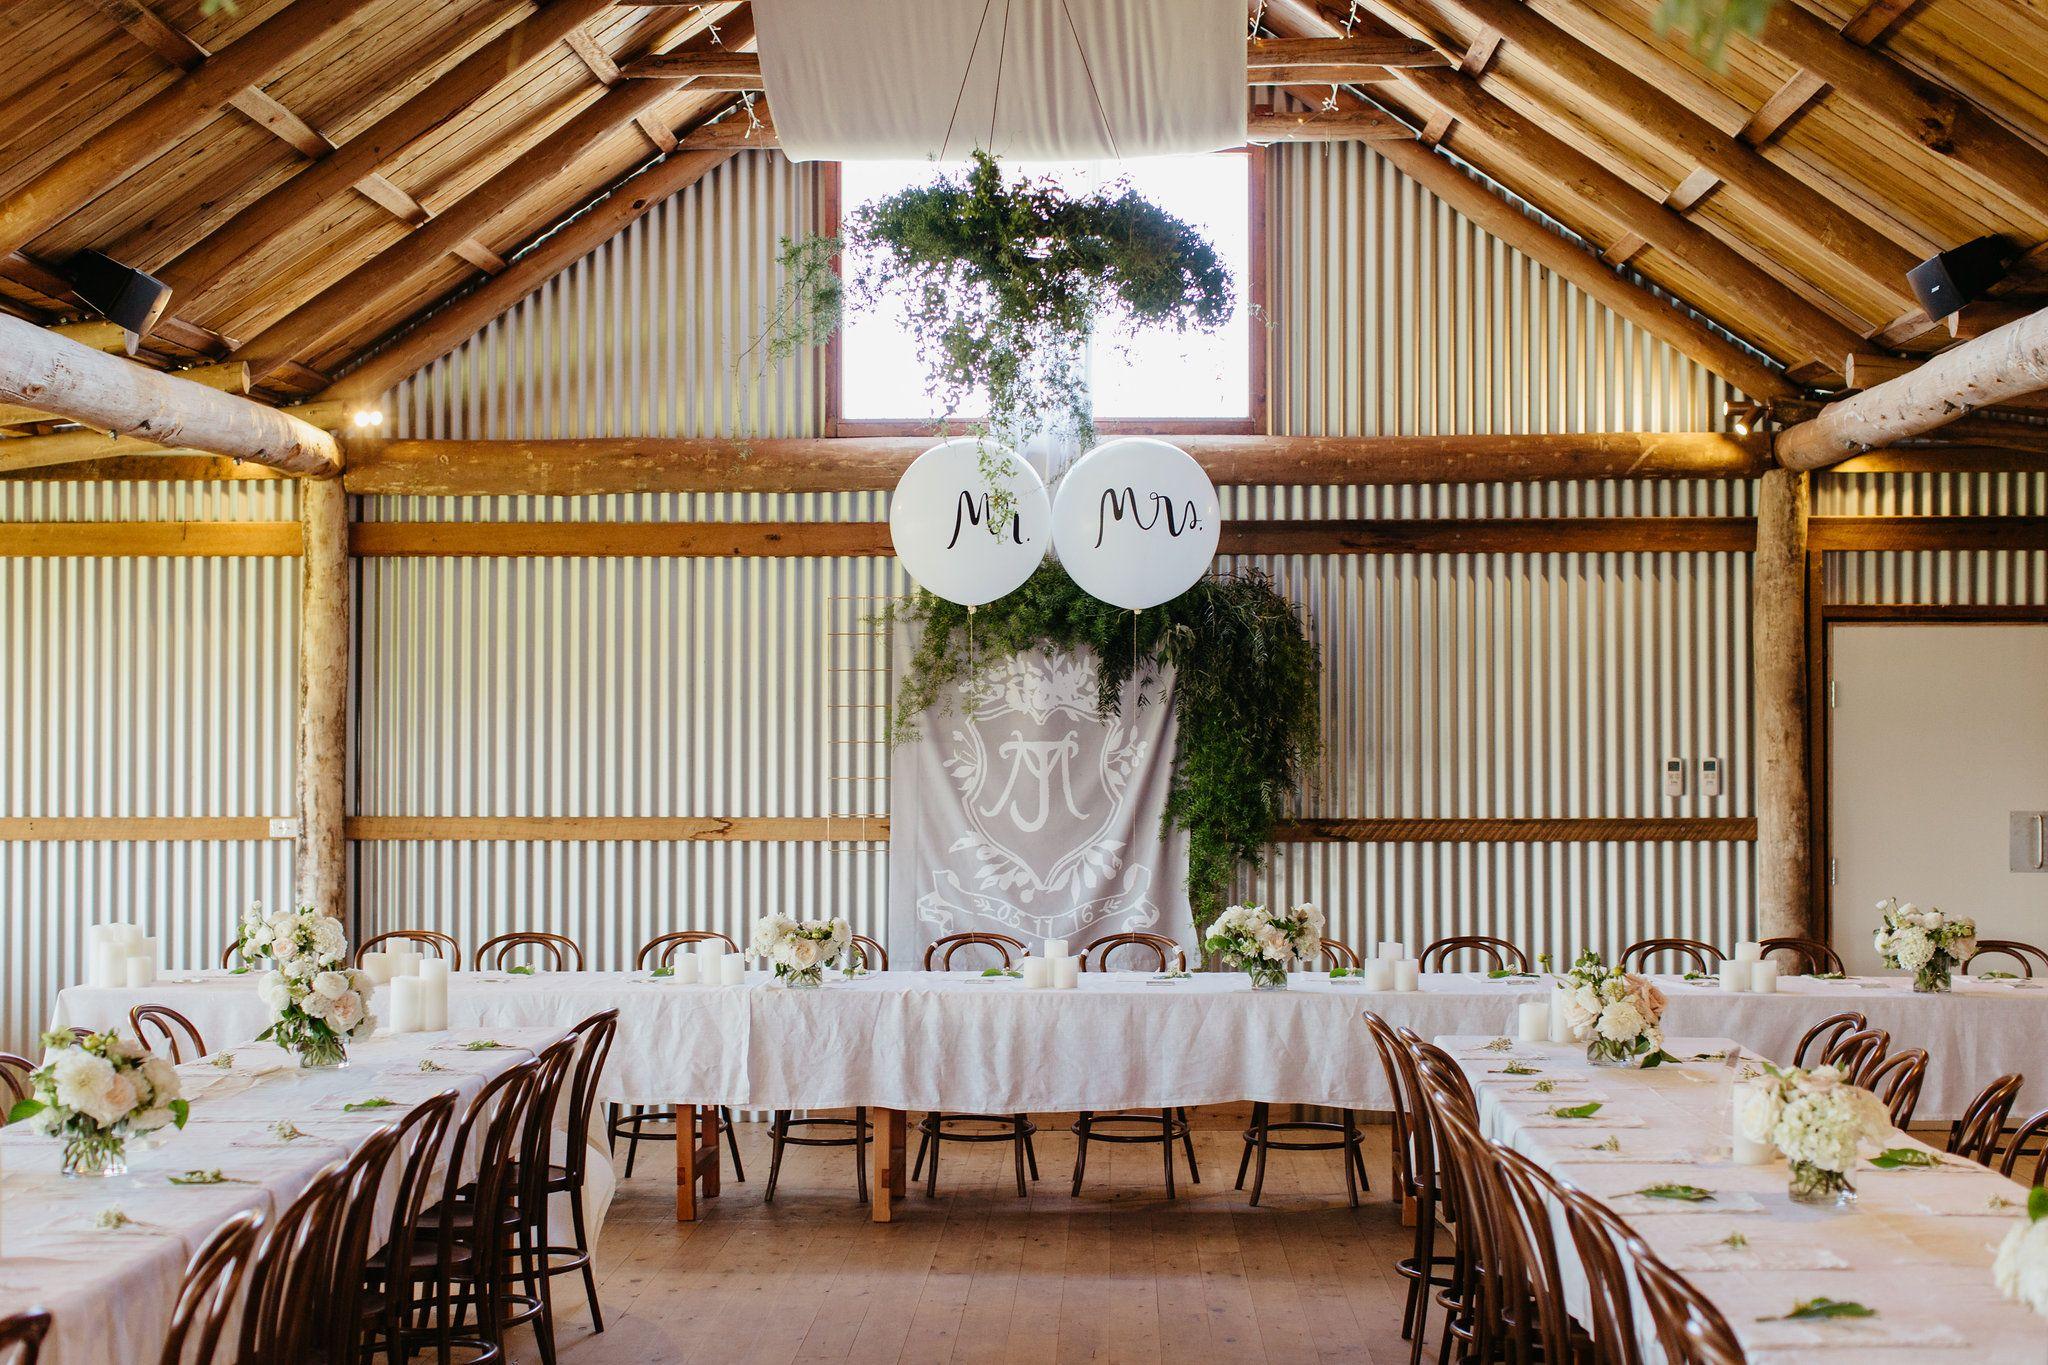 NSW country wedding venues